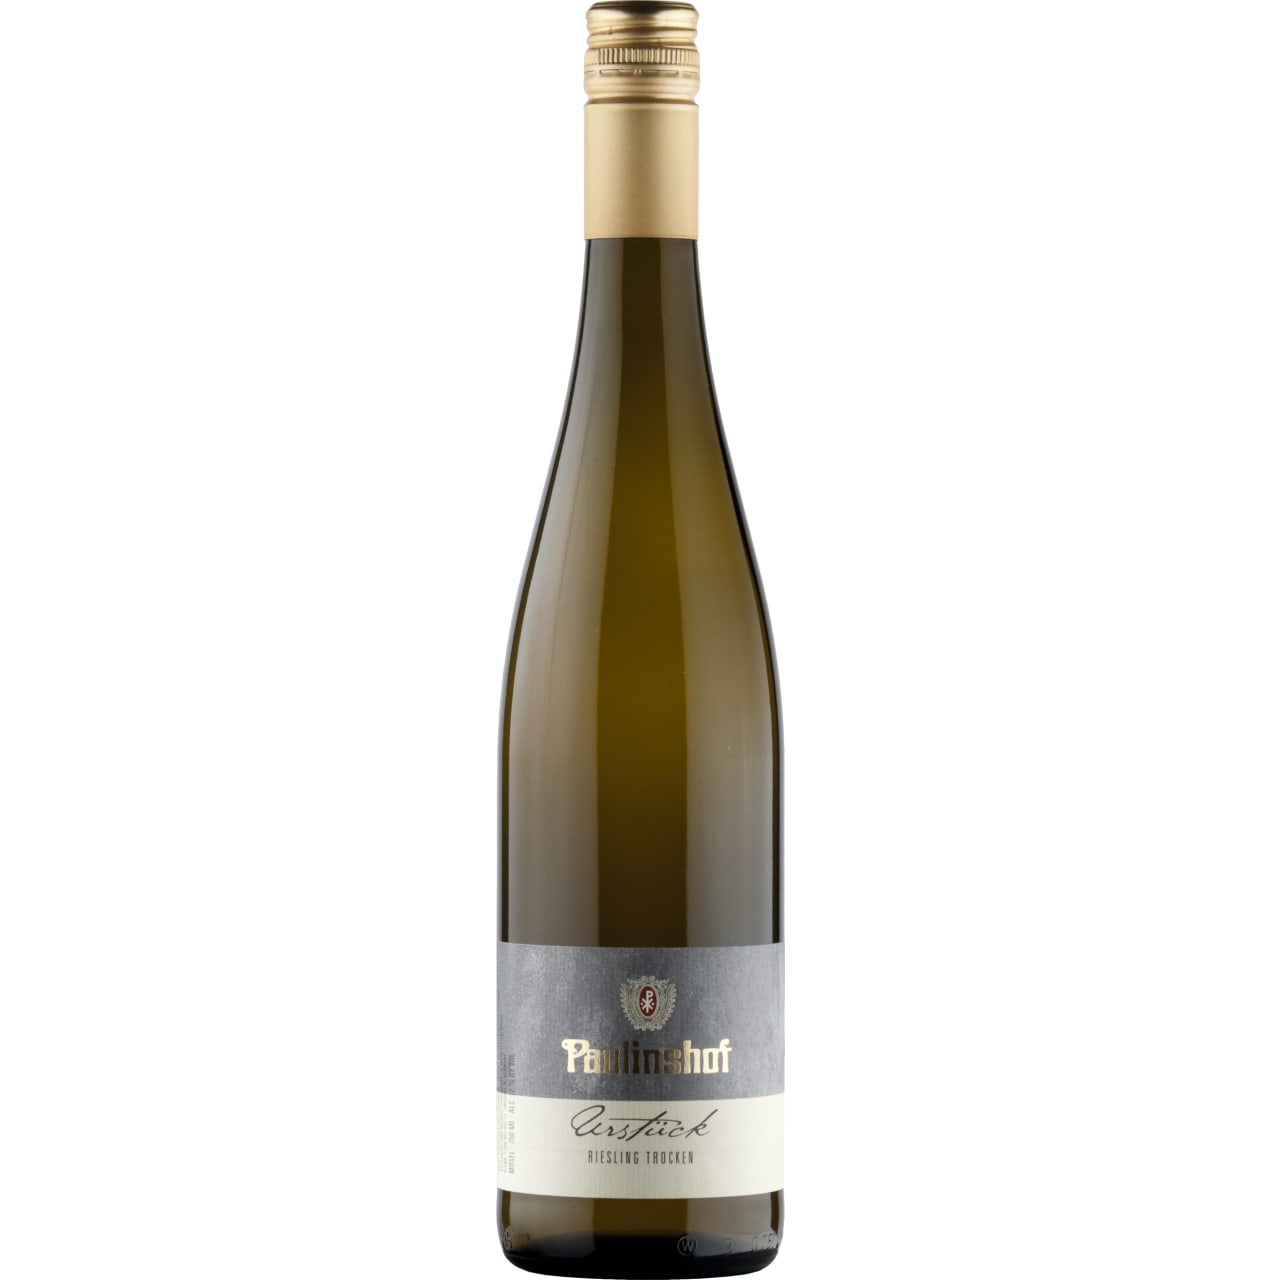 Dry Riesling with minerality, herbs, gooseberries and rhubarb with a long finish.